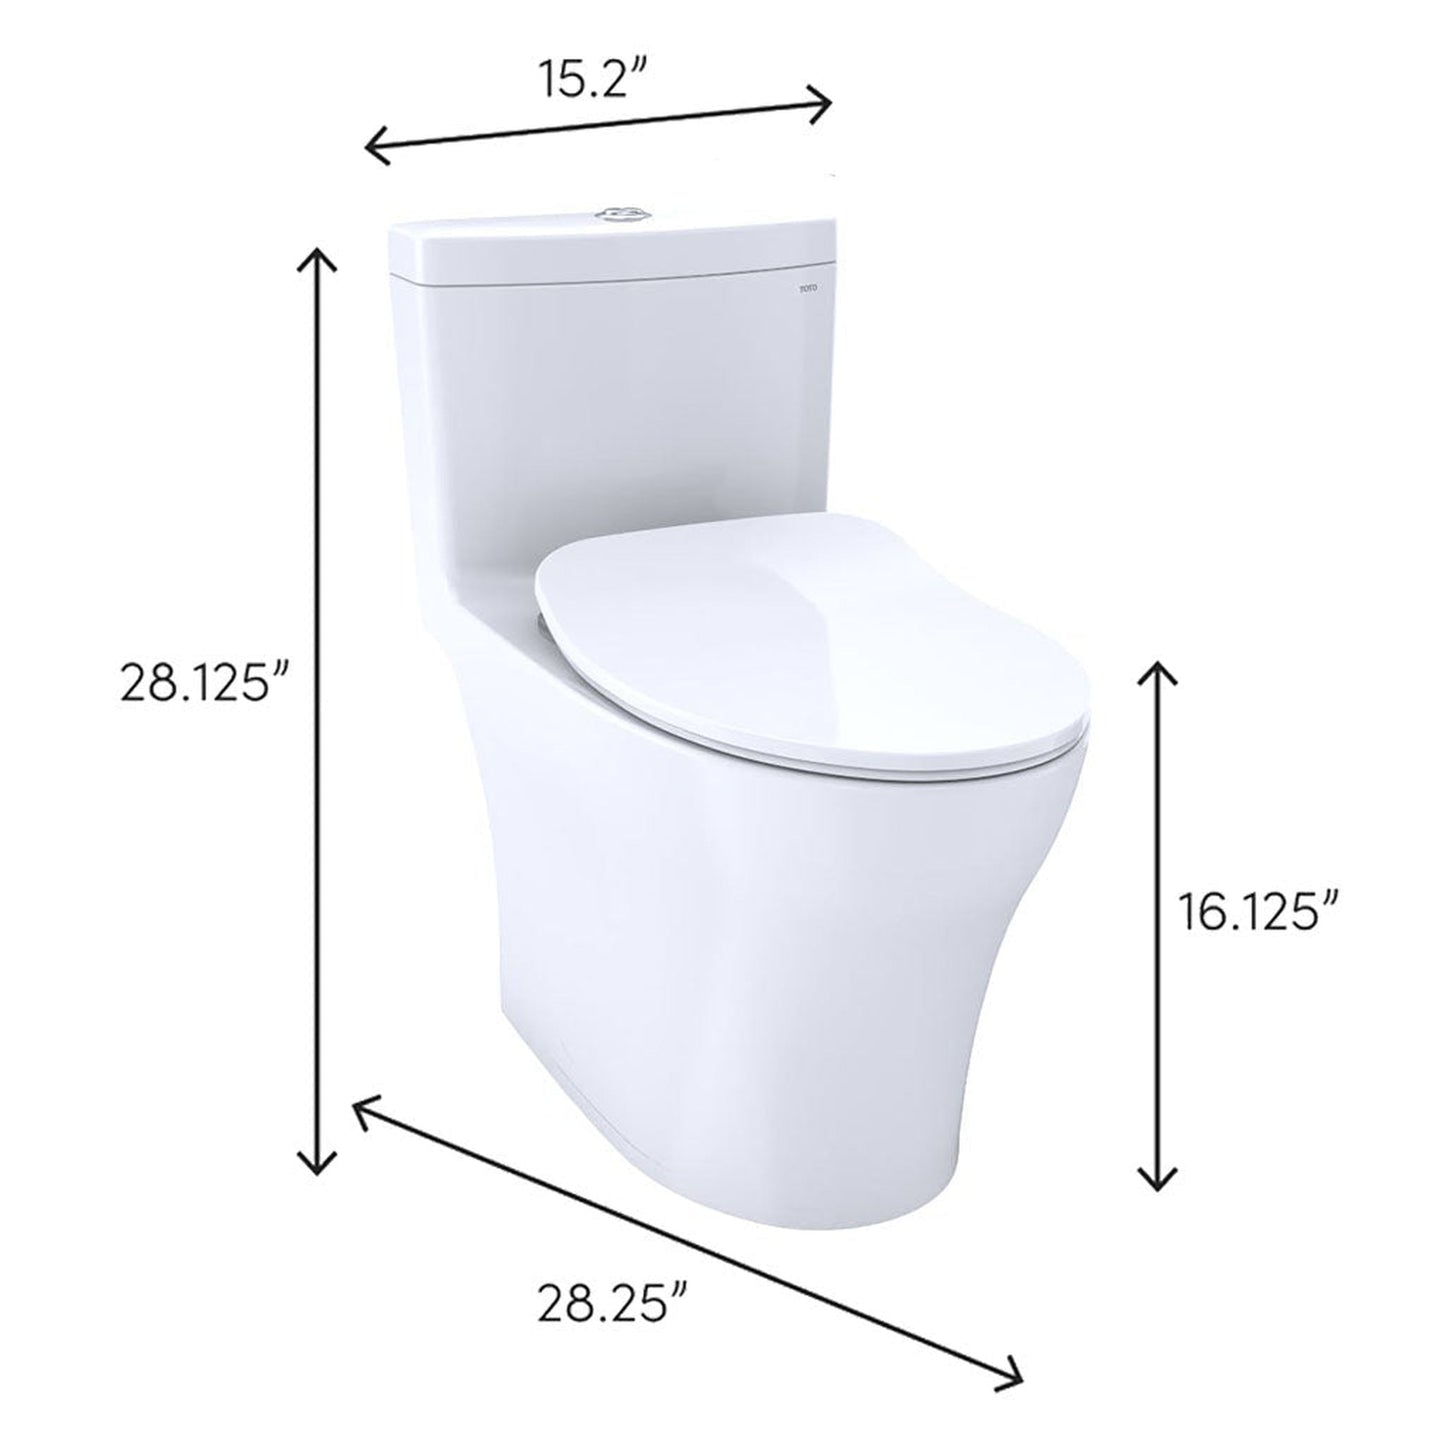 TOTO Aquia IV Cotton White One-Piece 0.8 GPF & 1.28 GPF Dual-Flush Elongated Toilet With WASHLET+ Connection - Slim Seat Included